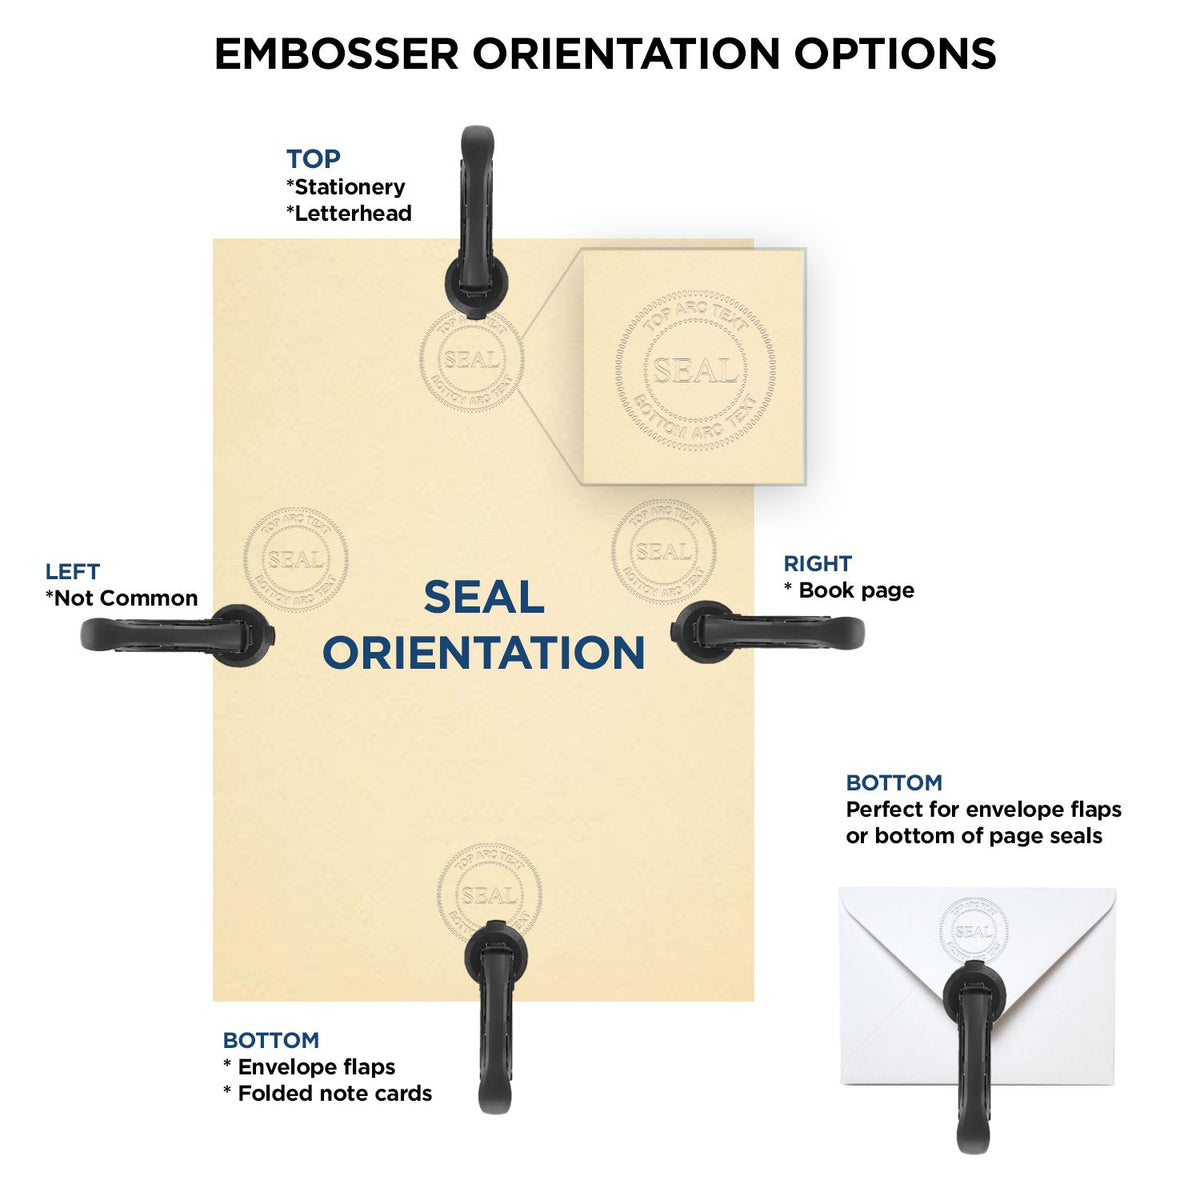 An infographic for the Nebraska Geologist Desk Seal showing embosser orientation, this is showing examples of a top, bottom, right and left insert.